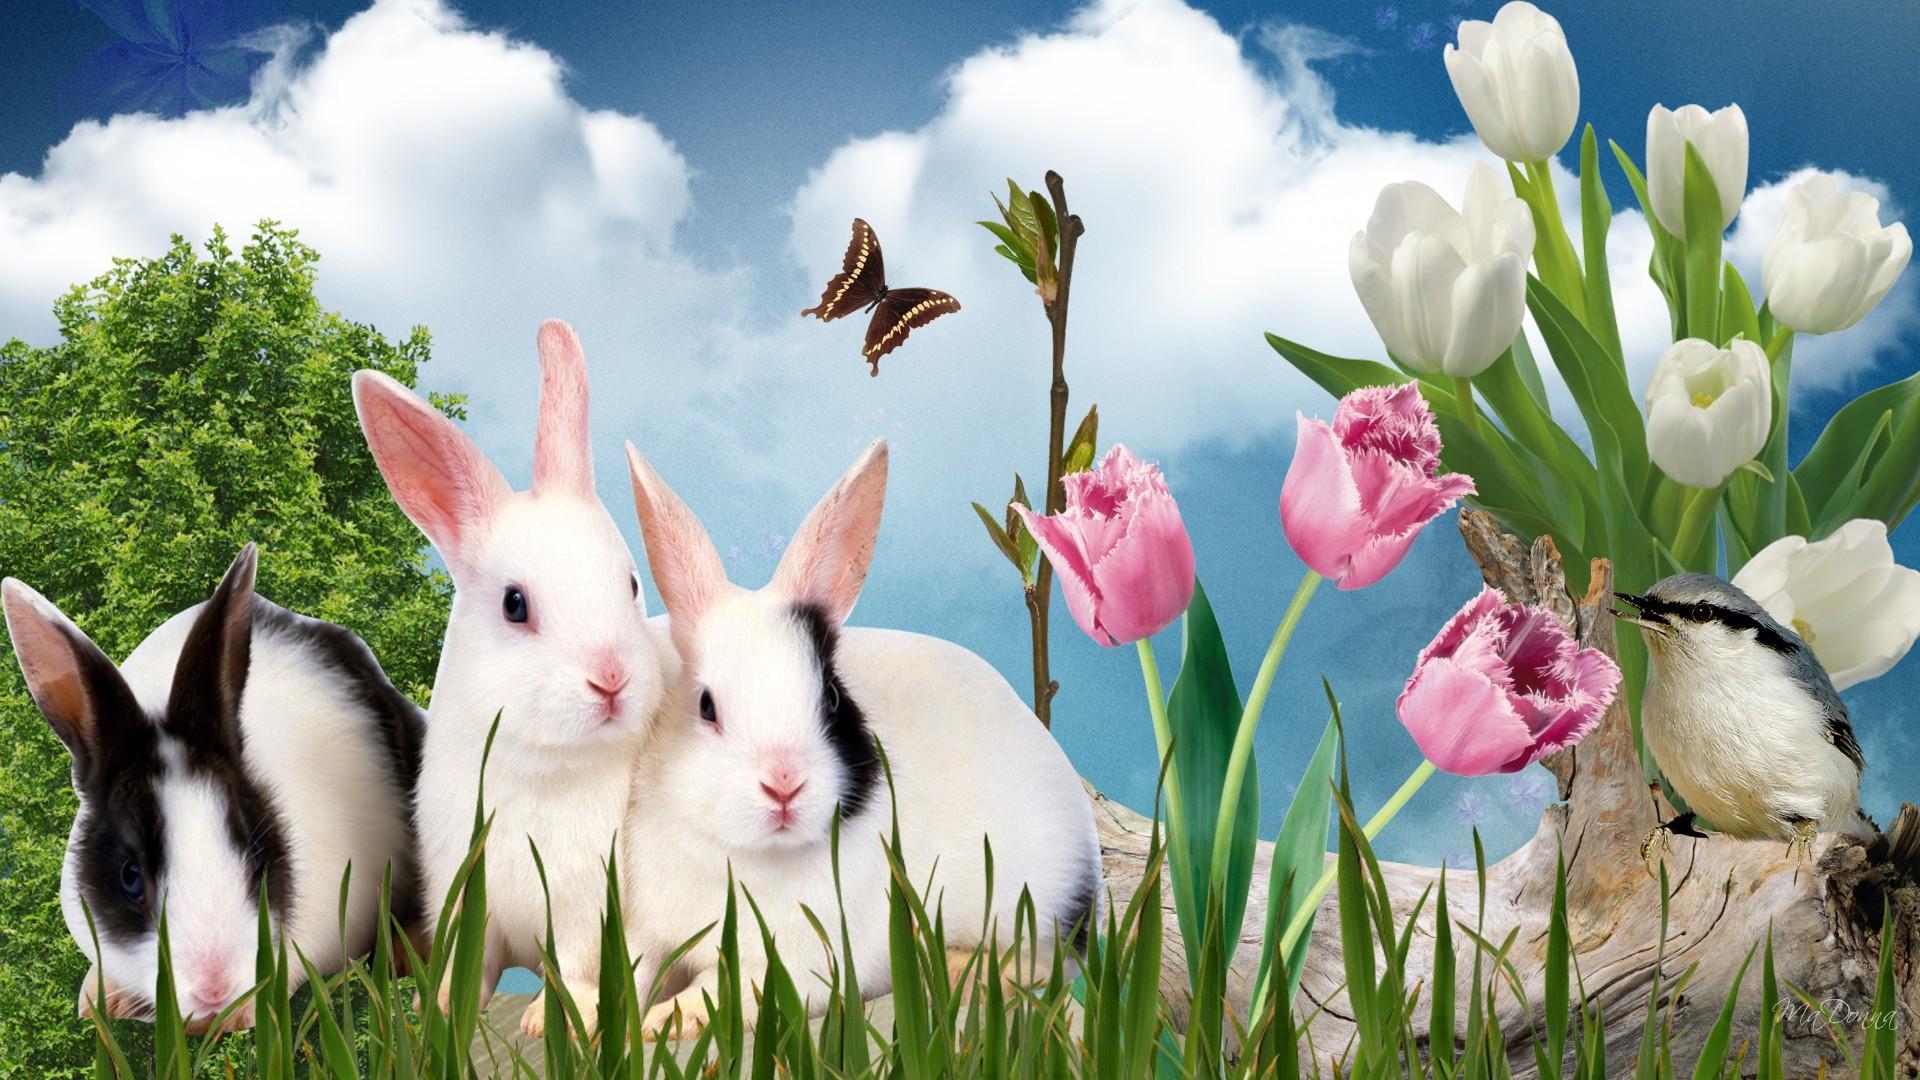 Download 3D Bunny Wallpapers - Top Free 3D Bunny Backgrounds ...